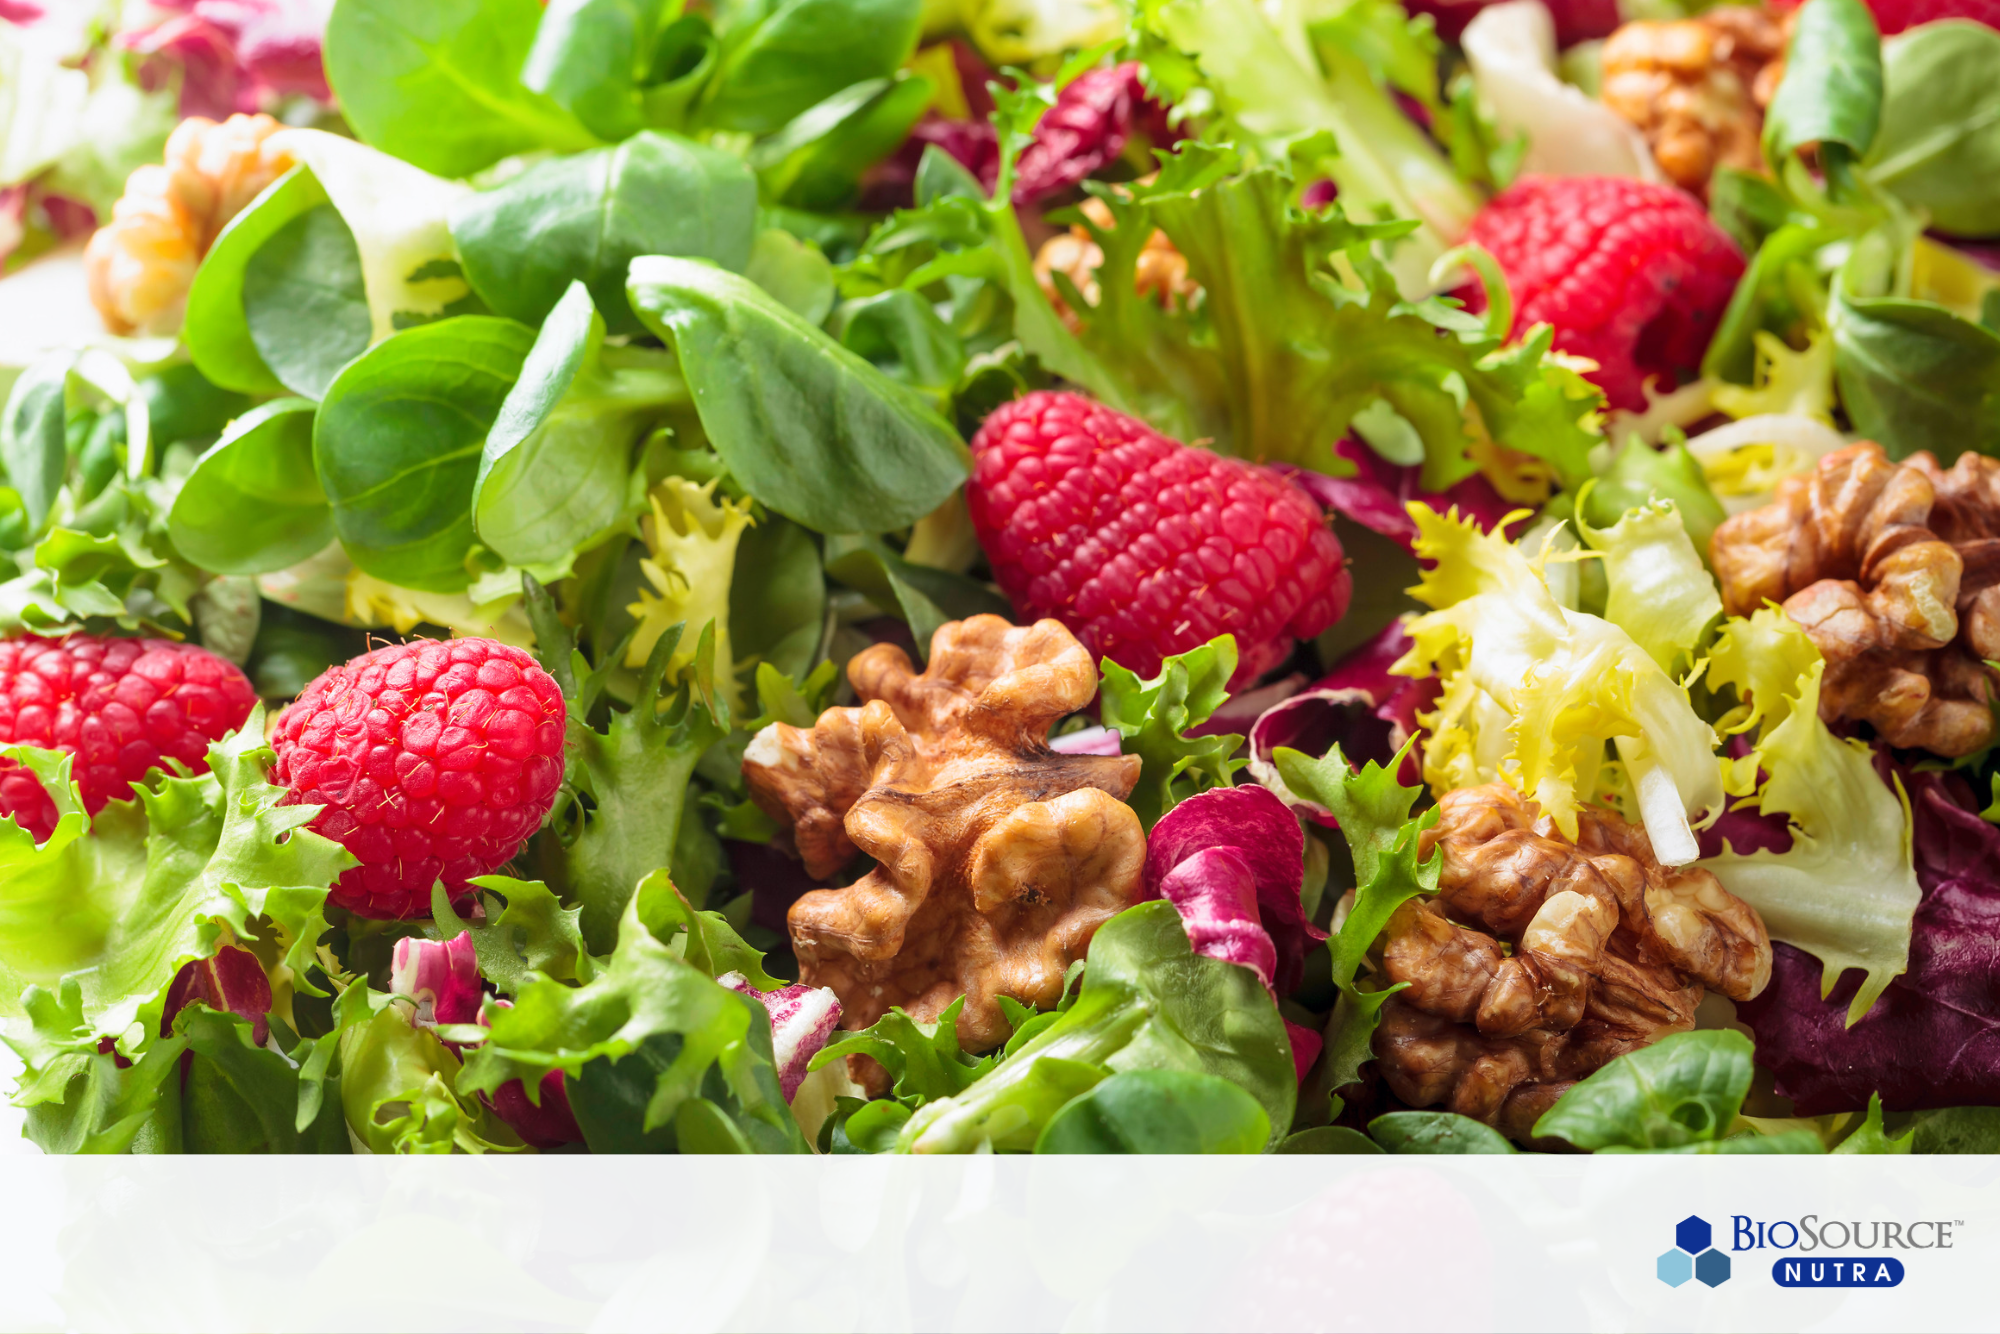 A fresh green salad with chicken, raspberries, and walnuts